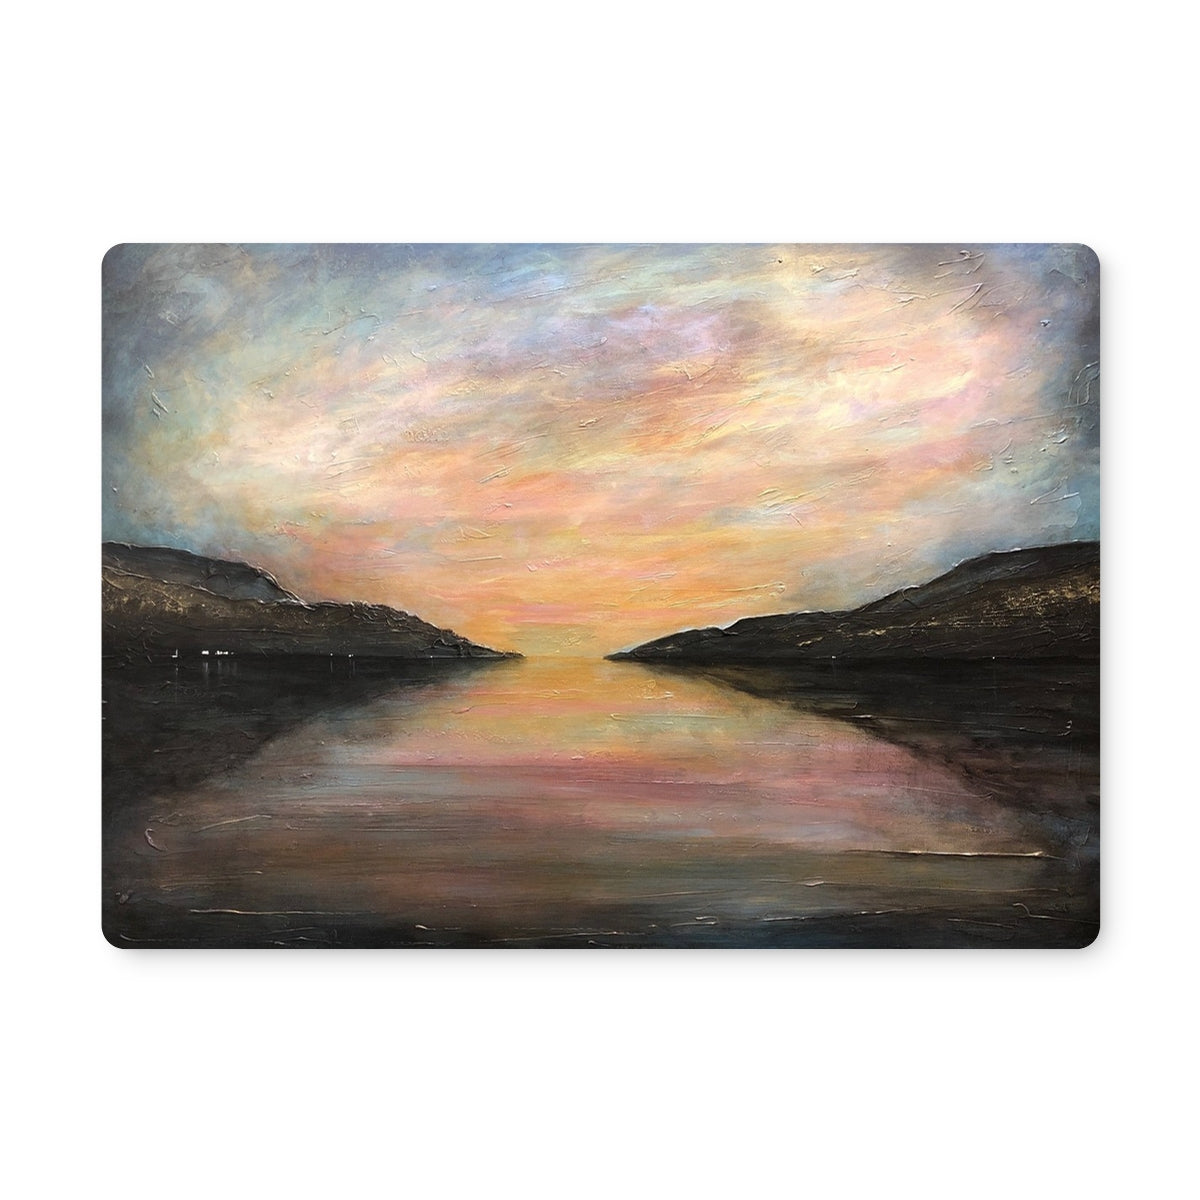 Loch Ness Glow Art Gifts Placemat-Placemats-Scottish Lochs & Mountains Art Gallery-2 Placemats-Paintings, Prints, Homeware, Art Gifts From Scotland By Scottish Artist Kevin Hunter